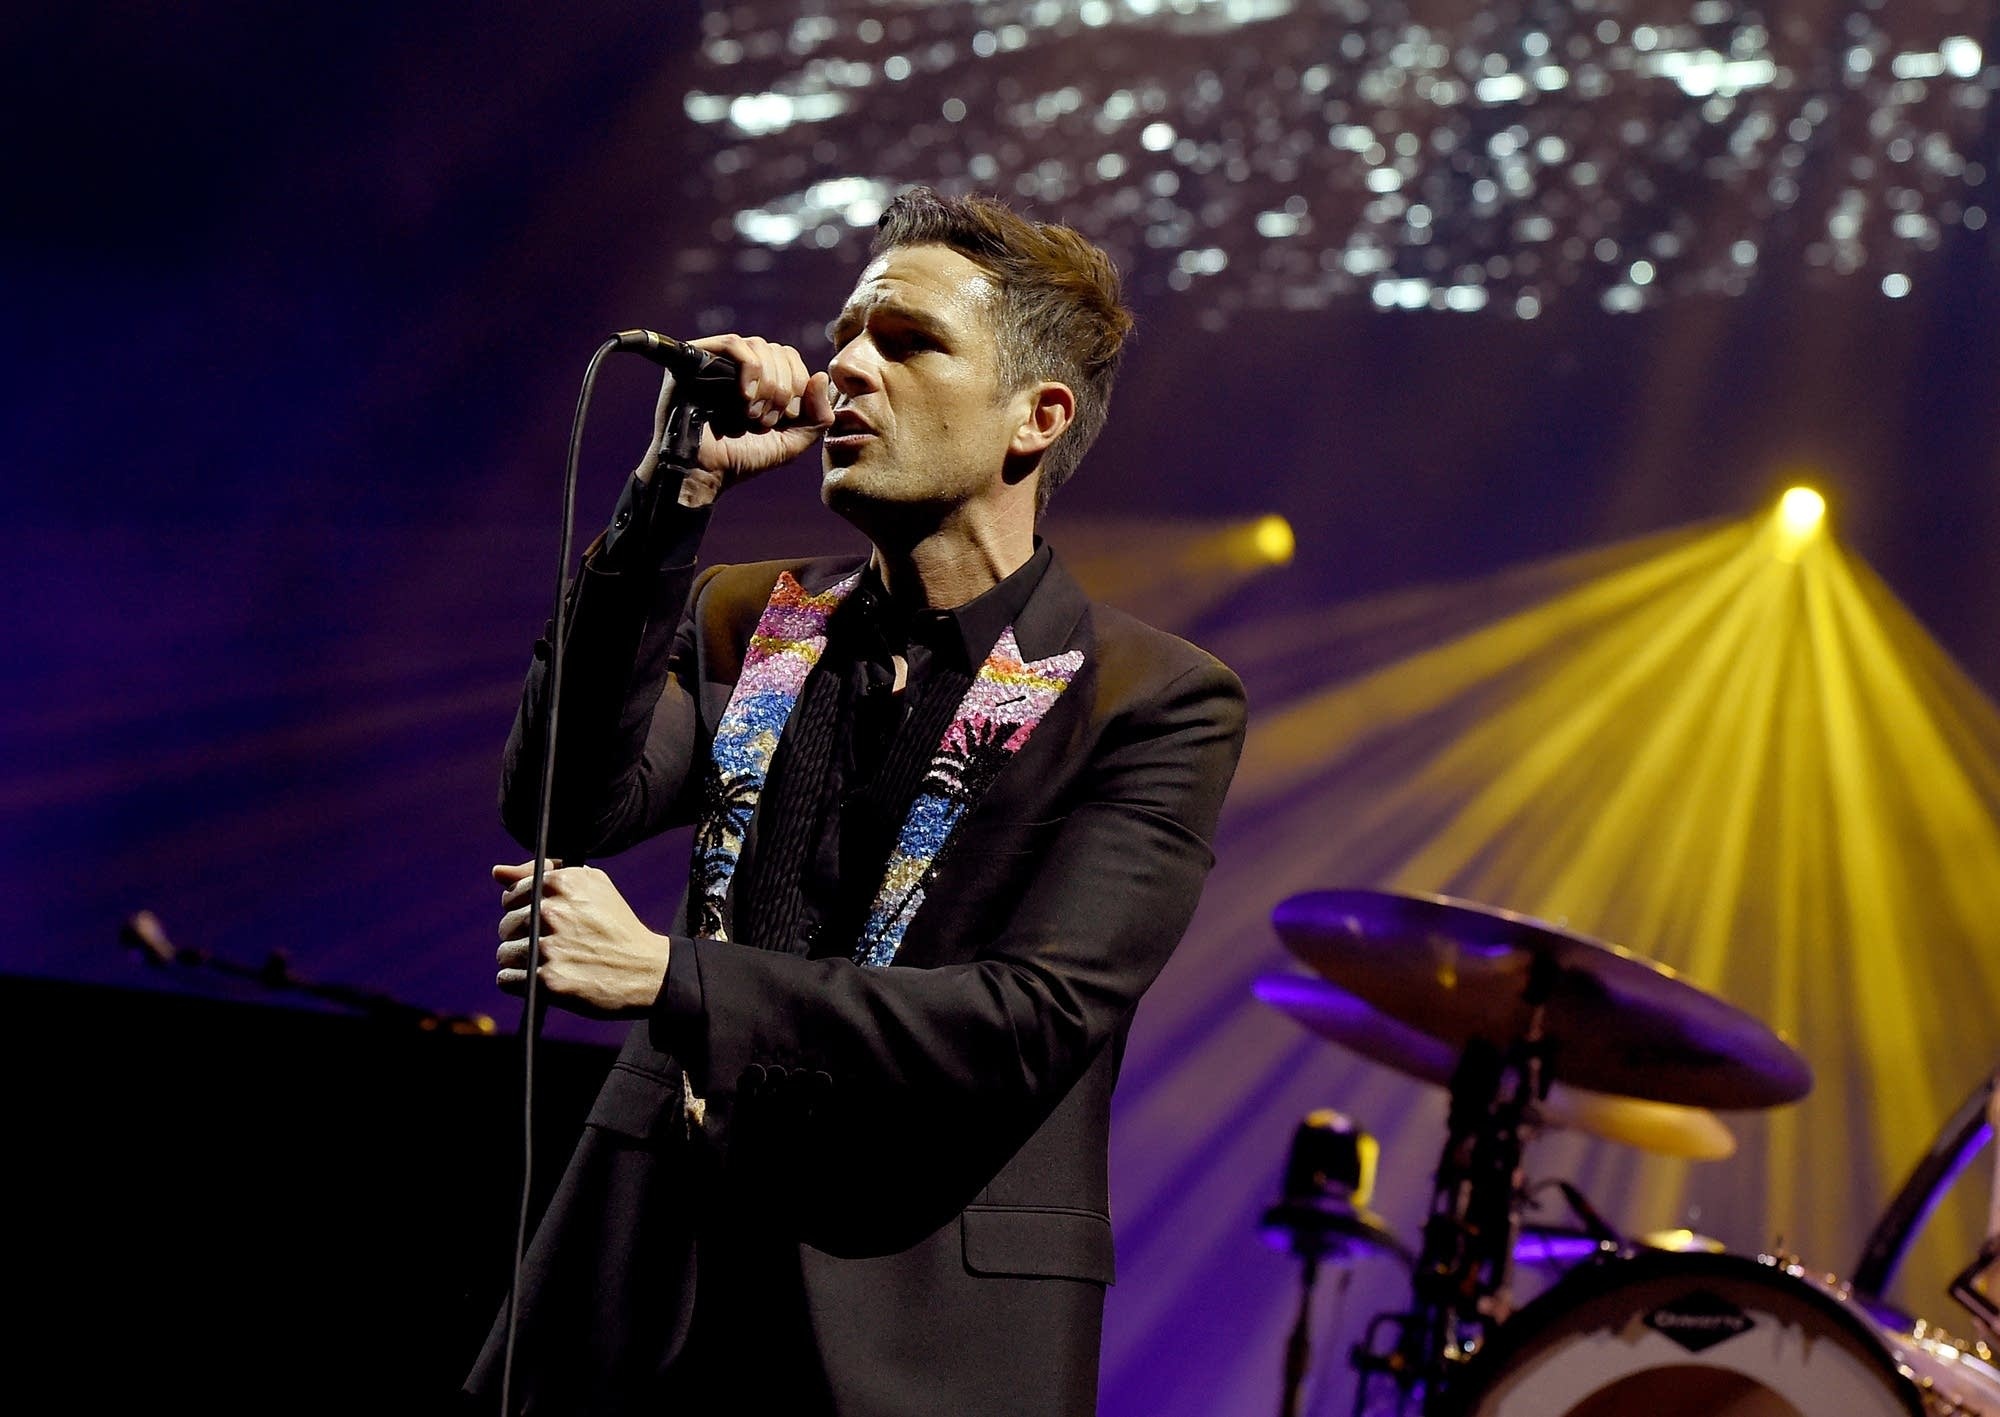 The Killers band, Music and art, Iconic music, 2000x1420 HD Desktop